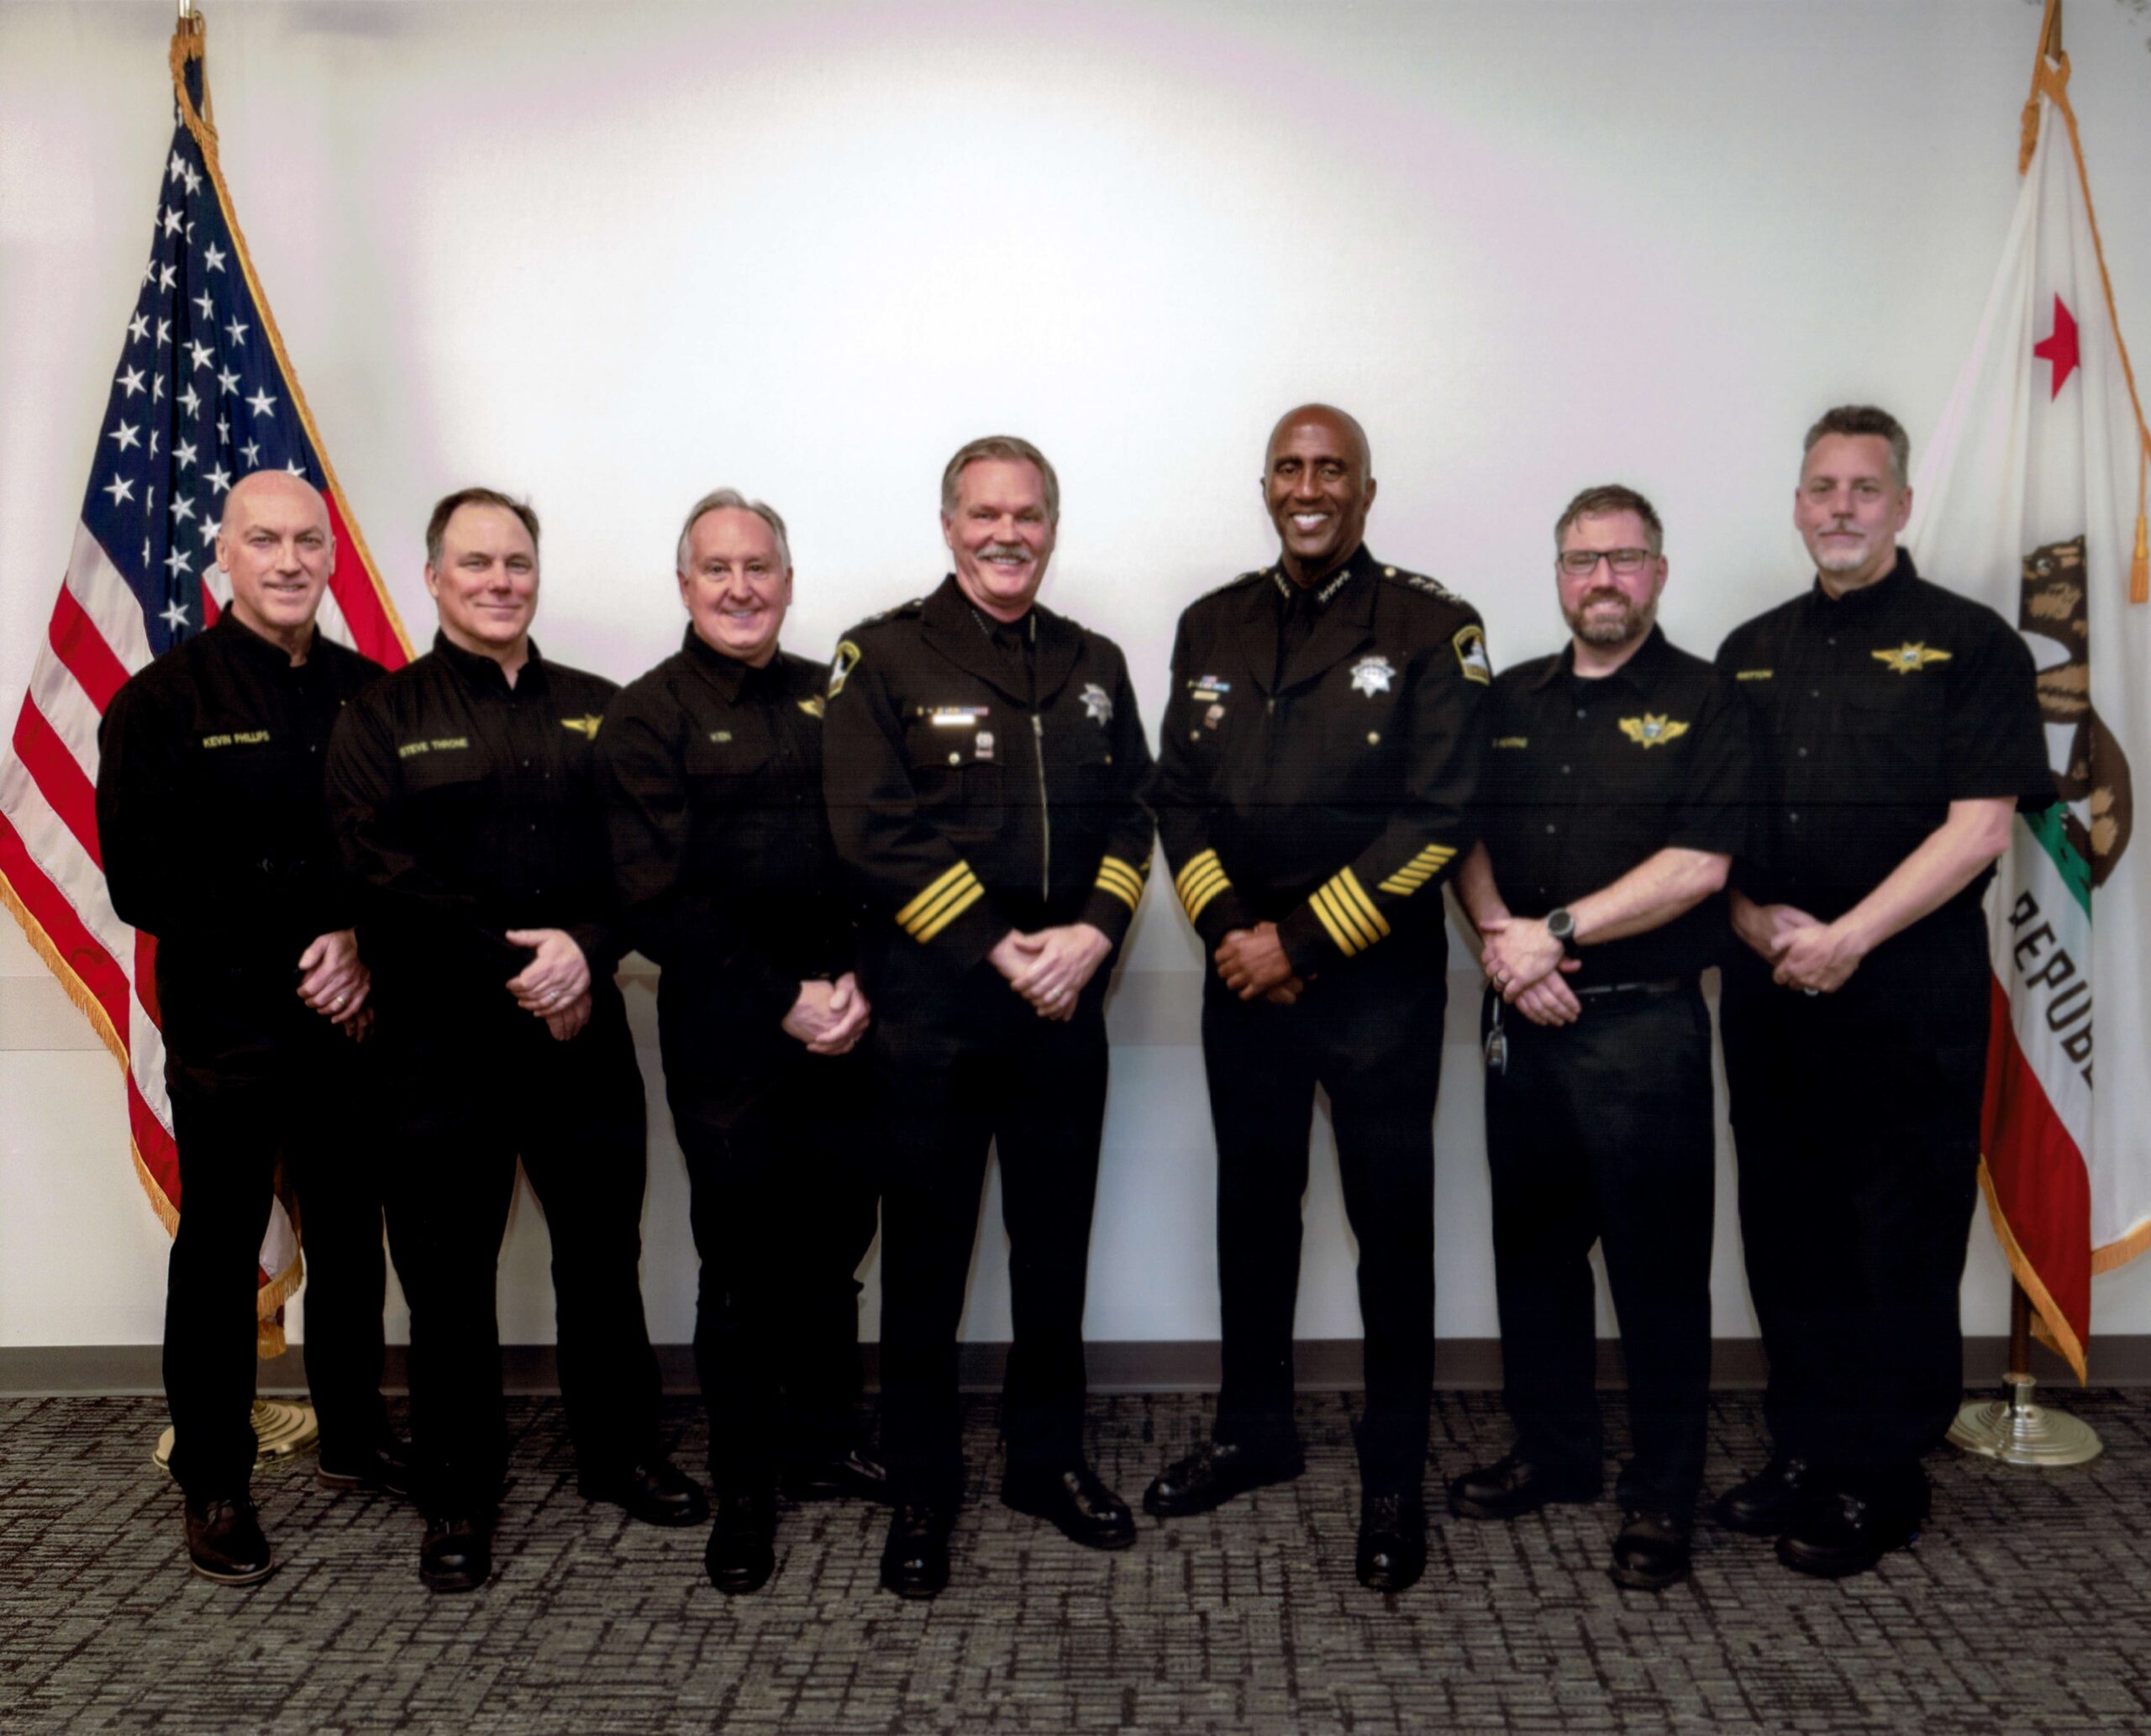 2023 Board of Directors with Sheriff Jim Cooper and Undersheriff Mike Ziegler